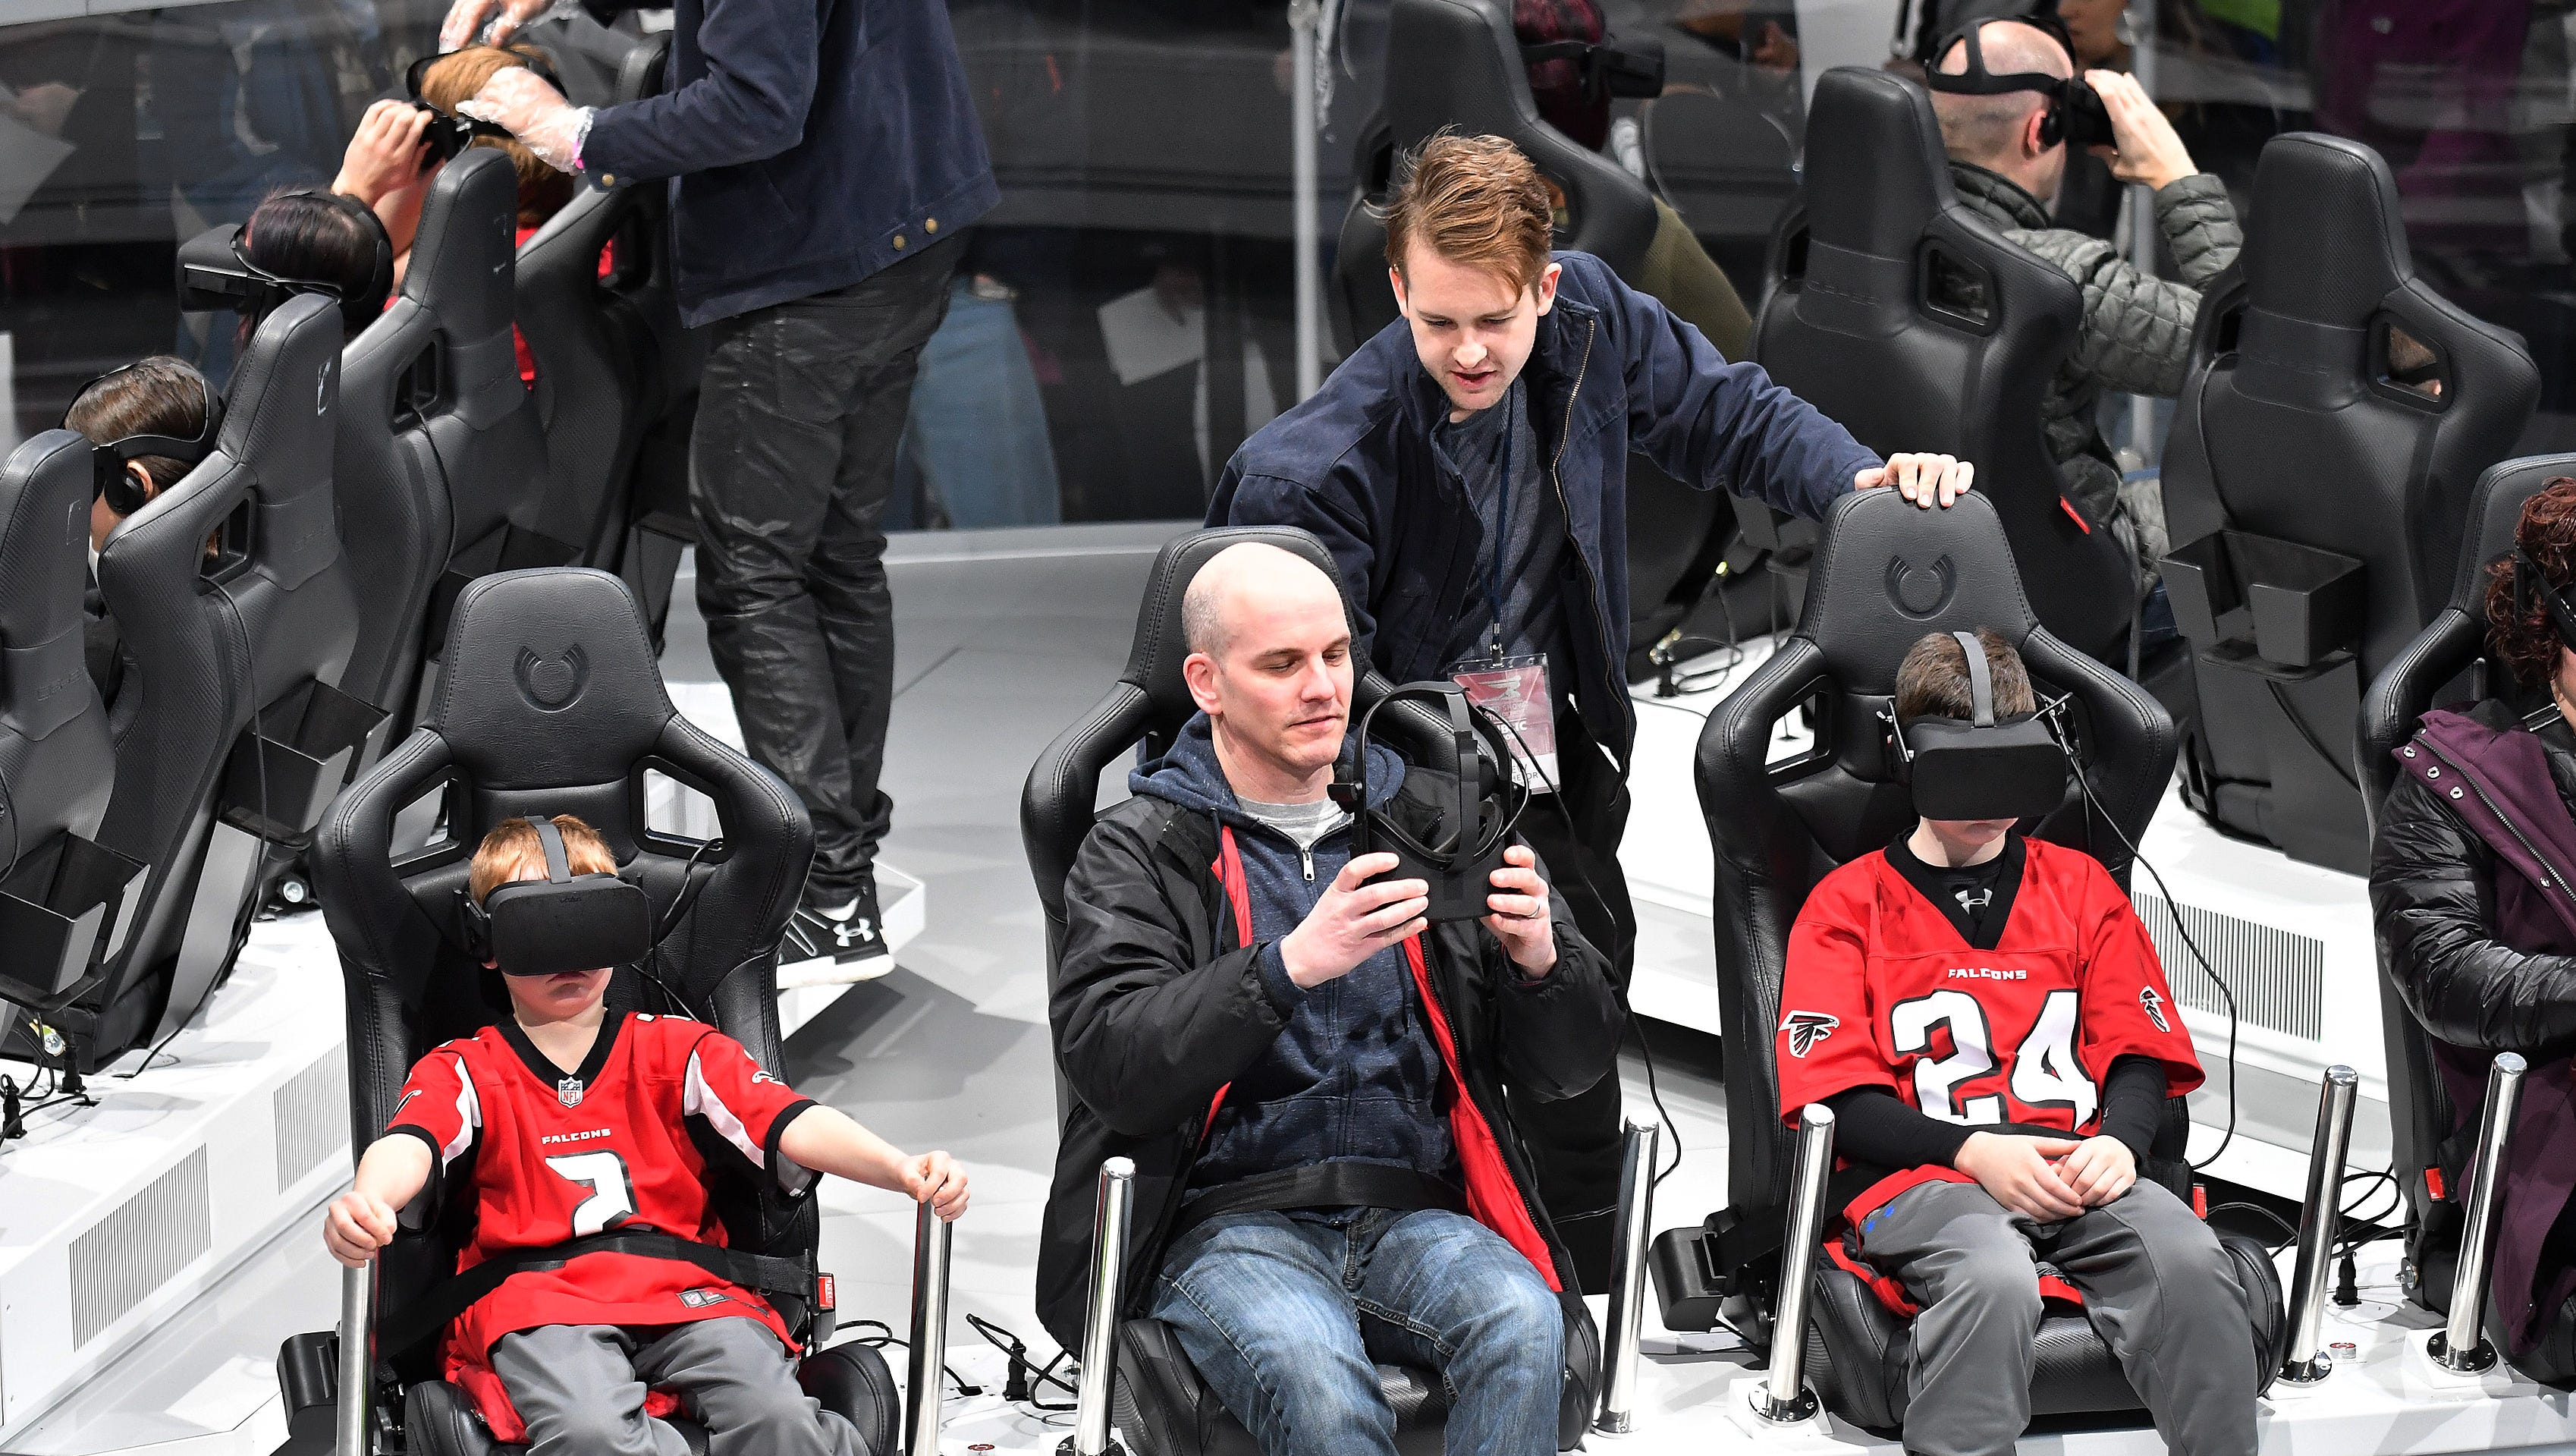 Ford brand ambassador Drew Batchelor talks with Mike Blumenstein with his sons, Ben Blumenstein, 10, left, and Brandon Blumenstein, 11, right, at the Ford future mobility virtual reality experience.